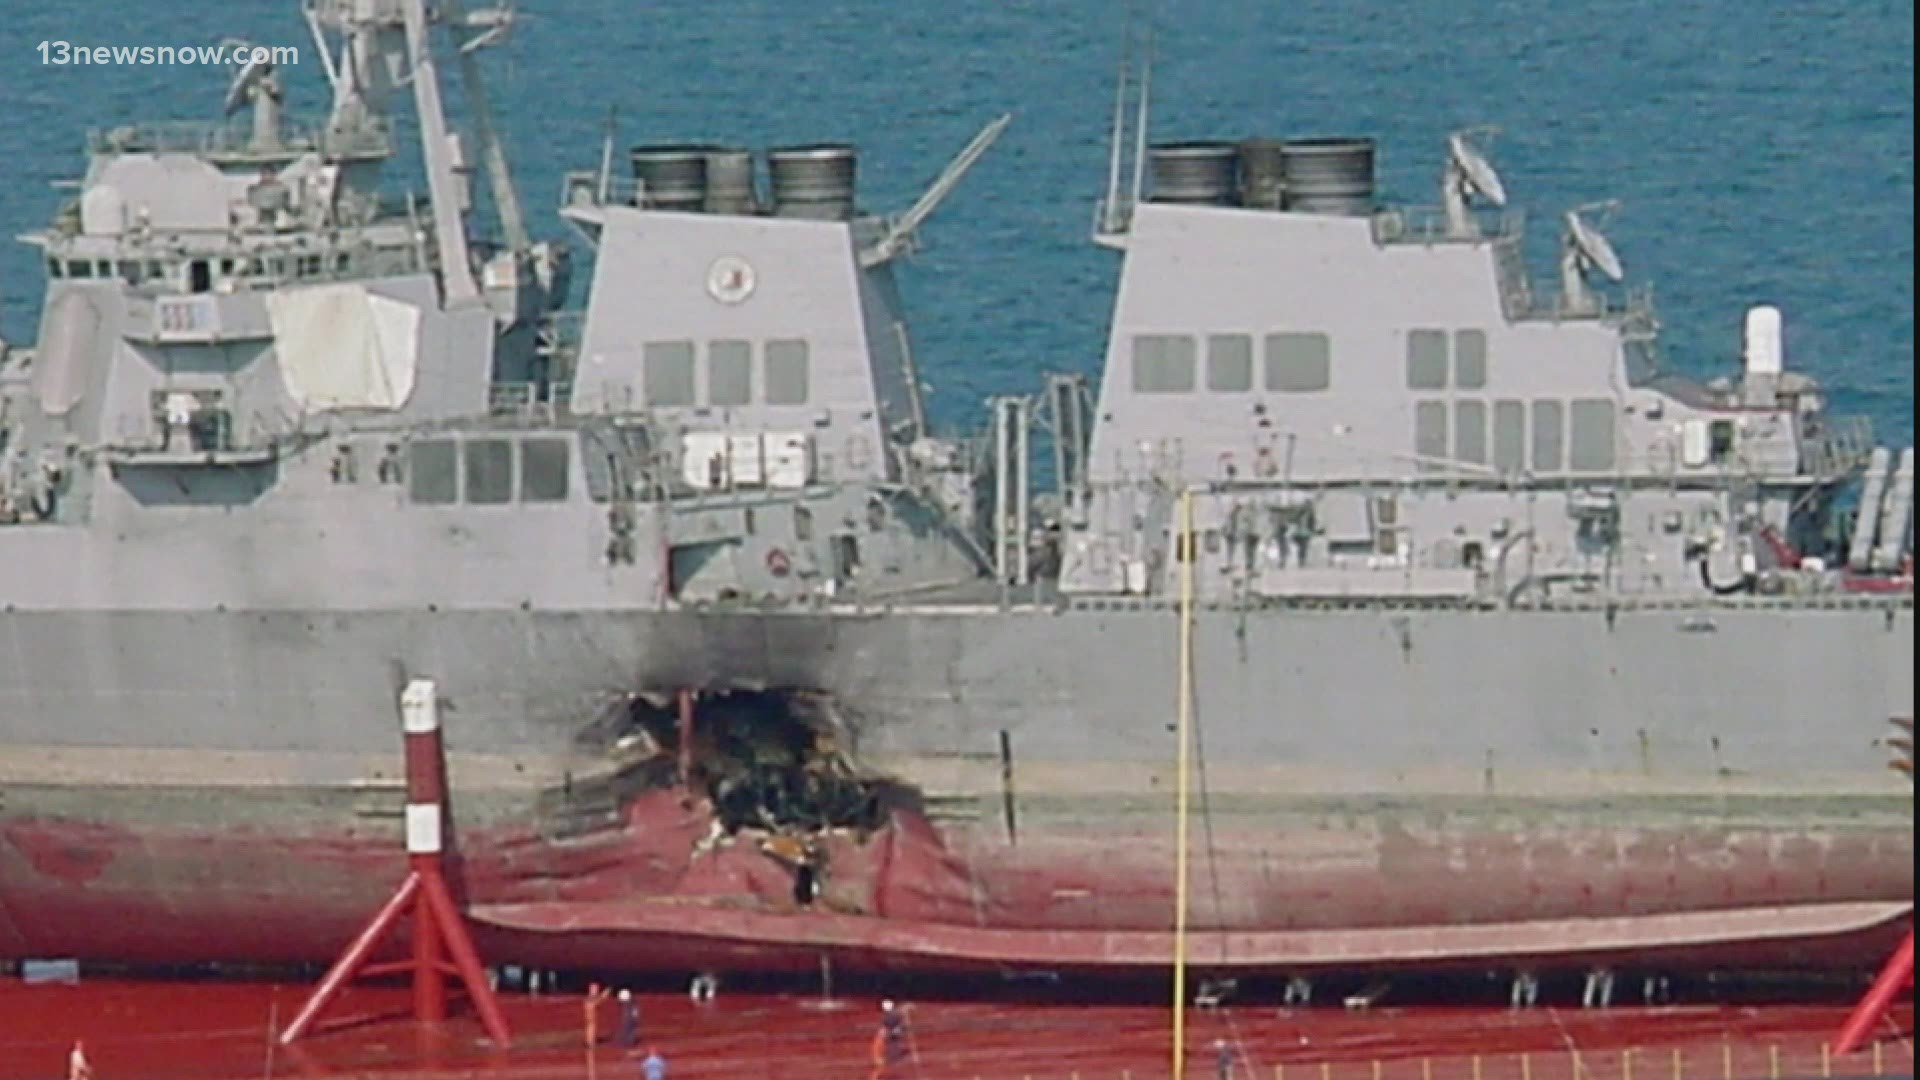 The Navy spent $250 million to fix the ship and it has since deployed overseas numerous times.